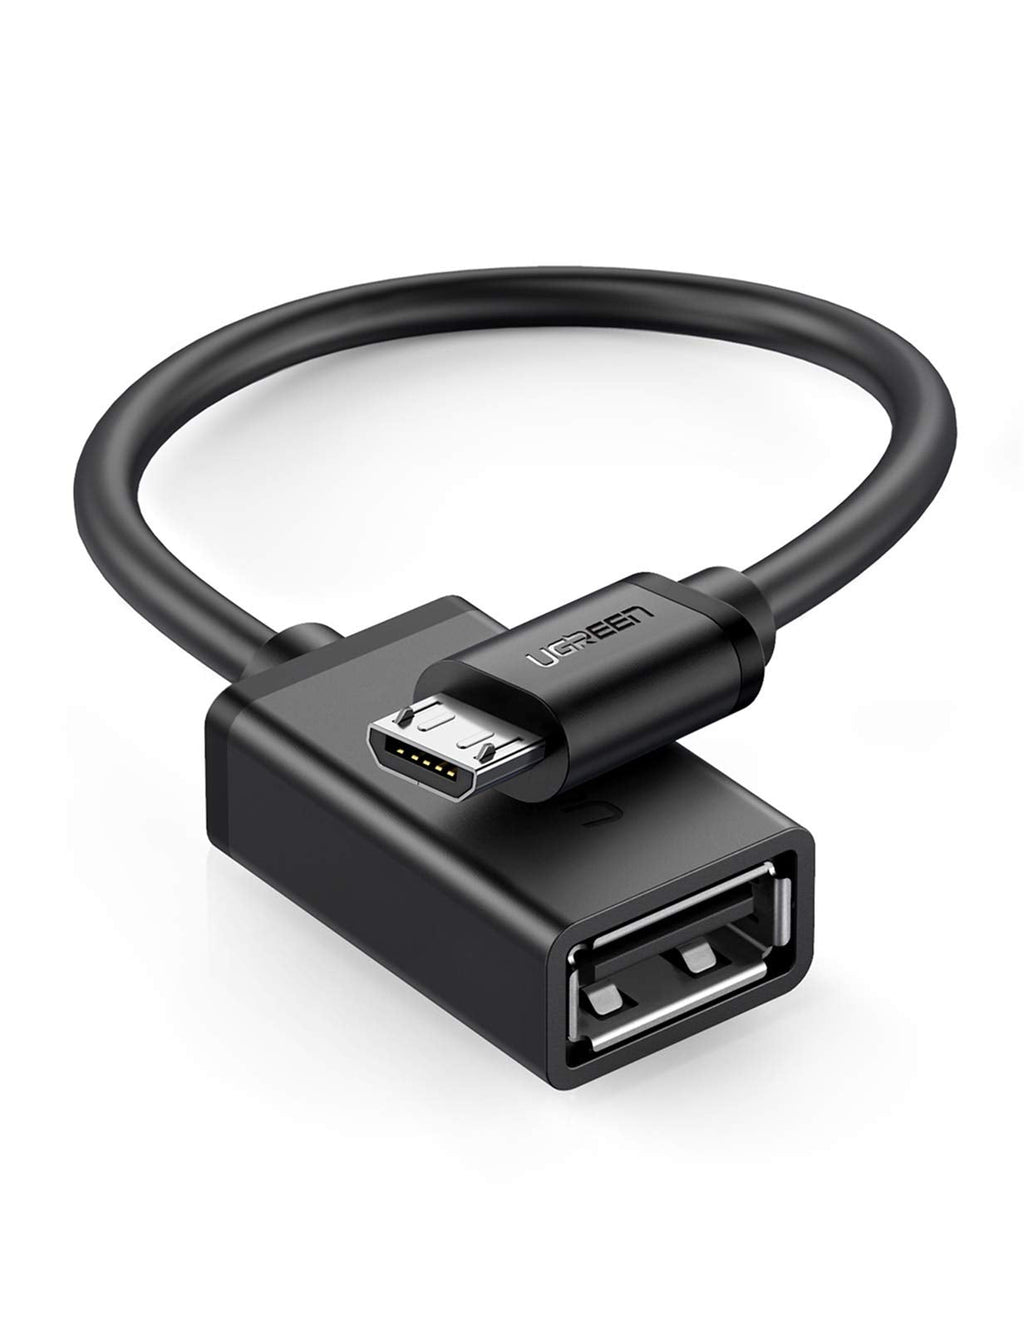  [AUSTRALIA] - UGREEN Micro USB 2.0 OTG Cable On The Go Adapter Male Micro USB to Female USB Compatible with Samsung Phone S7 S6 Edge S4 S3 LG G4 Controller Android Windows Smartphone Tablets 4 Inch Black